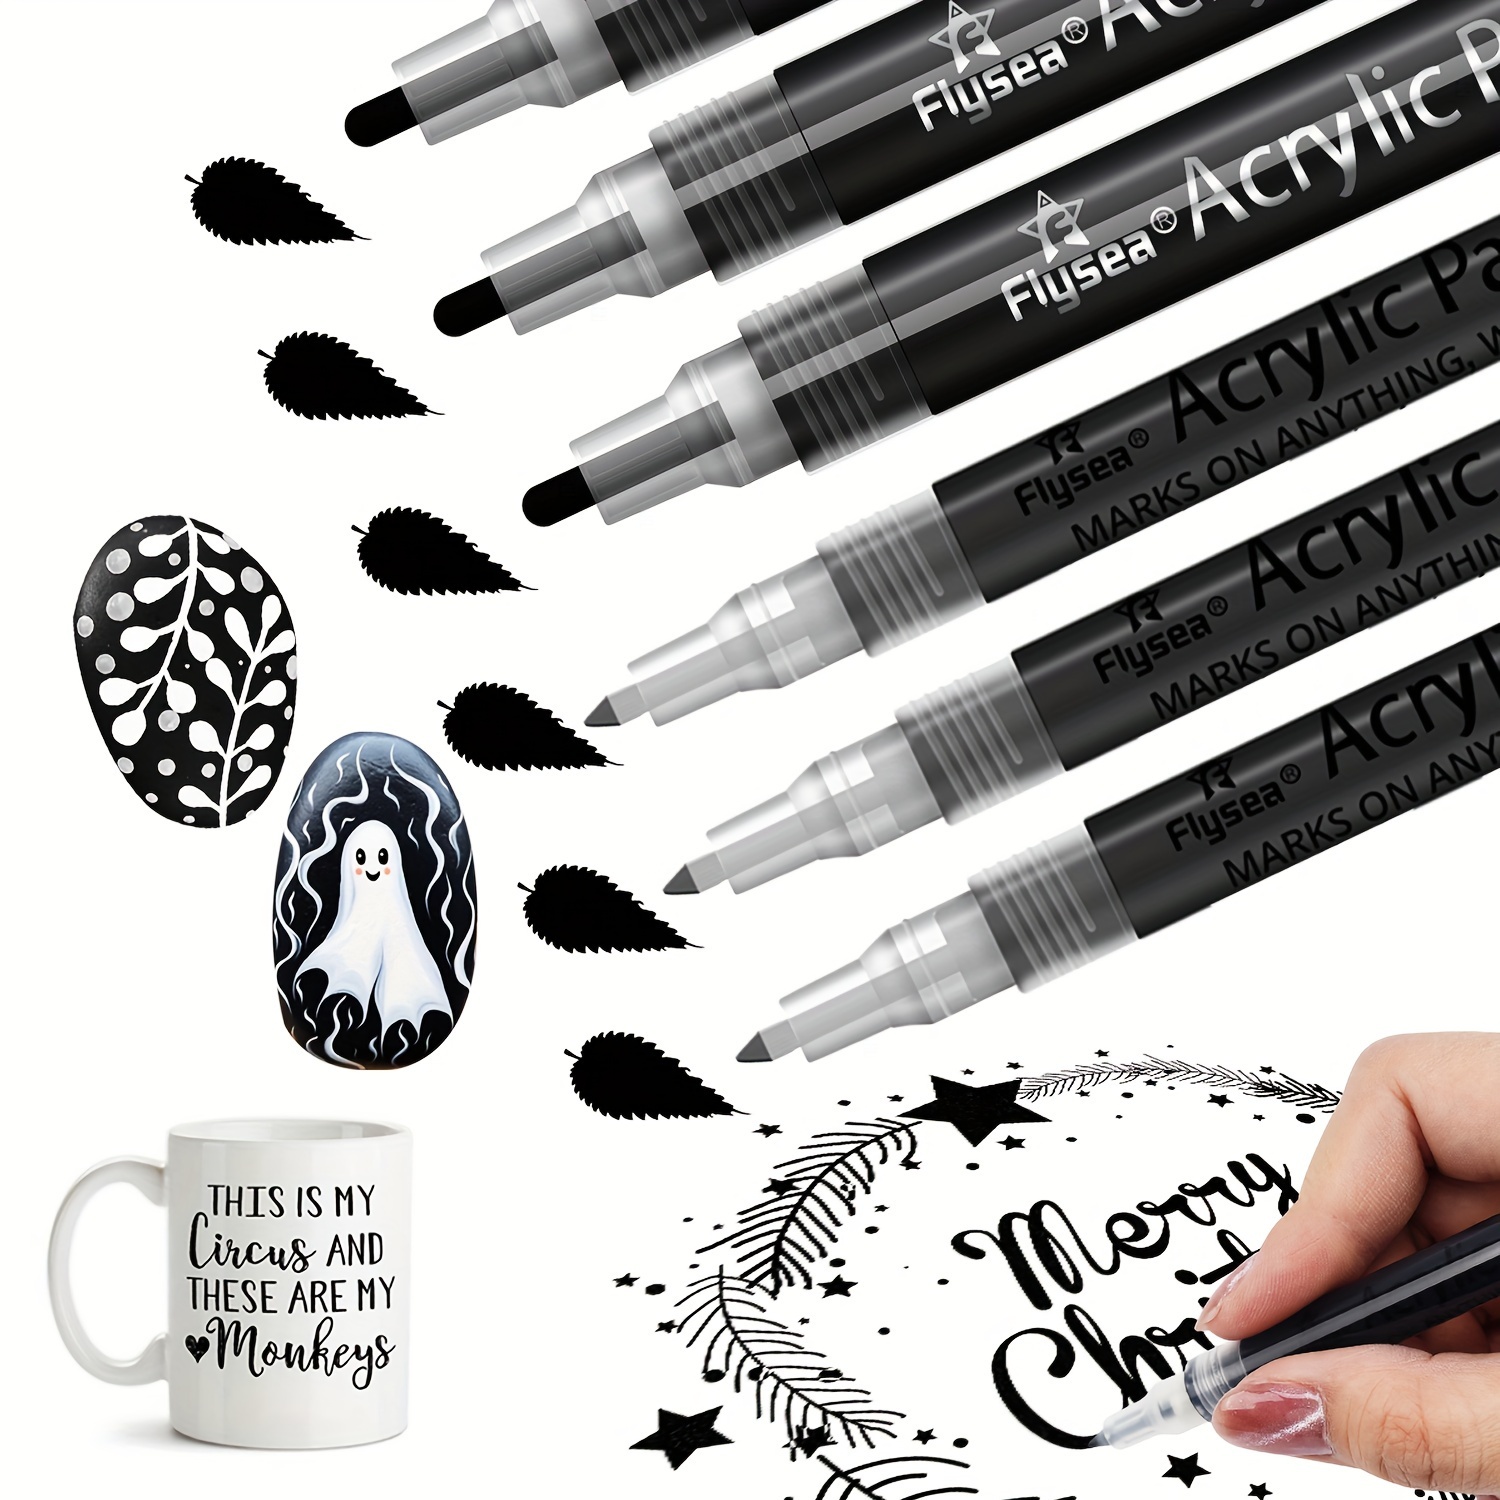 8pcs Highlight Paint Pen Acrylic White Marker, 4 White 2 Gold and 2 Silver  Acrylic Markers for Metal, Art, Wood, Black Paper, Plastic, Ceramic